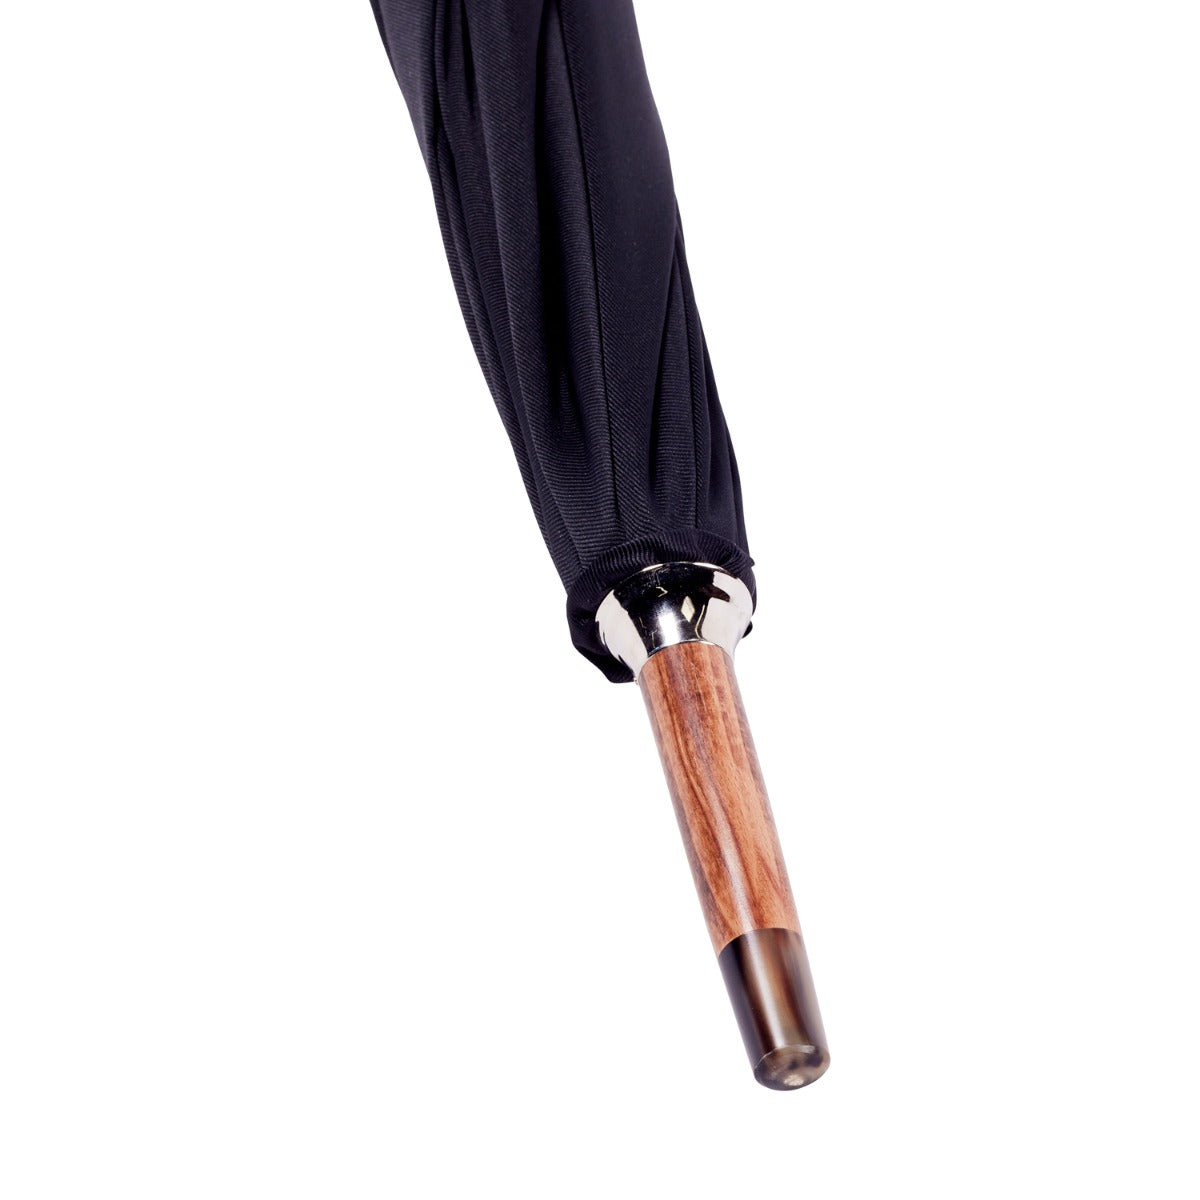 A handcrafted Black Canopy Umbrella with Malacca Handle from KirbyAllison.com.